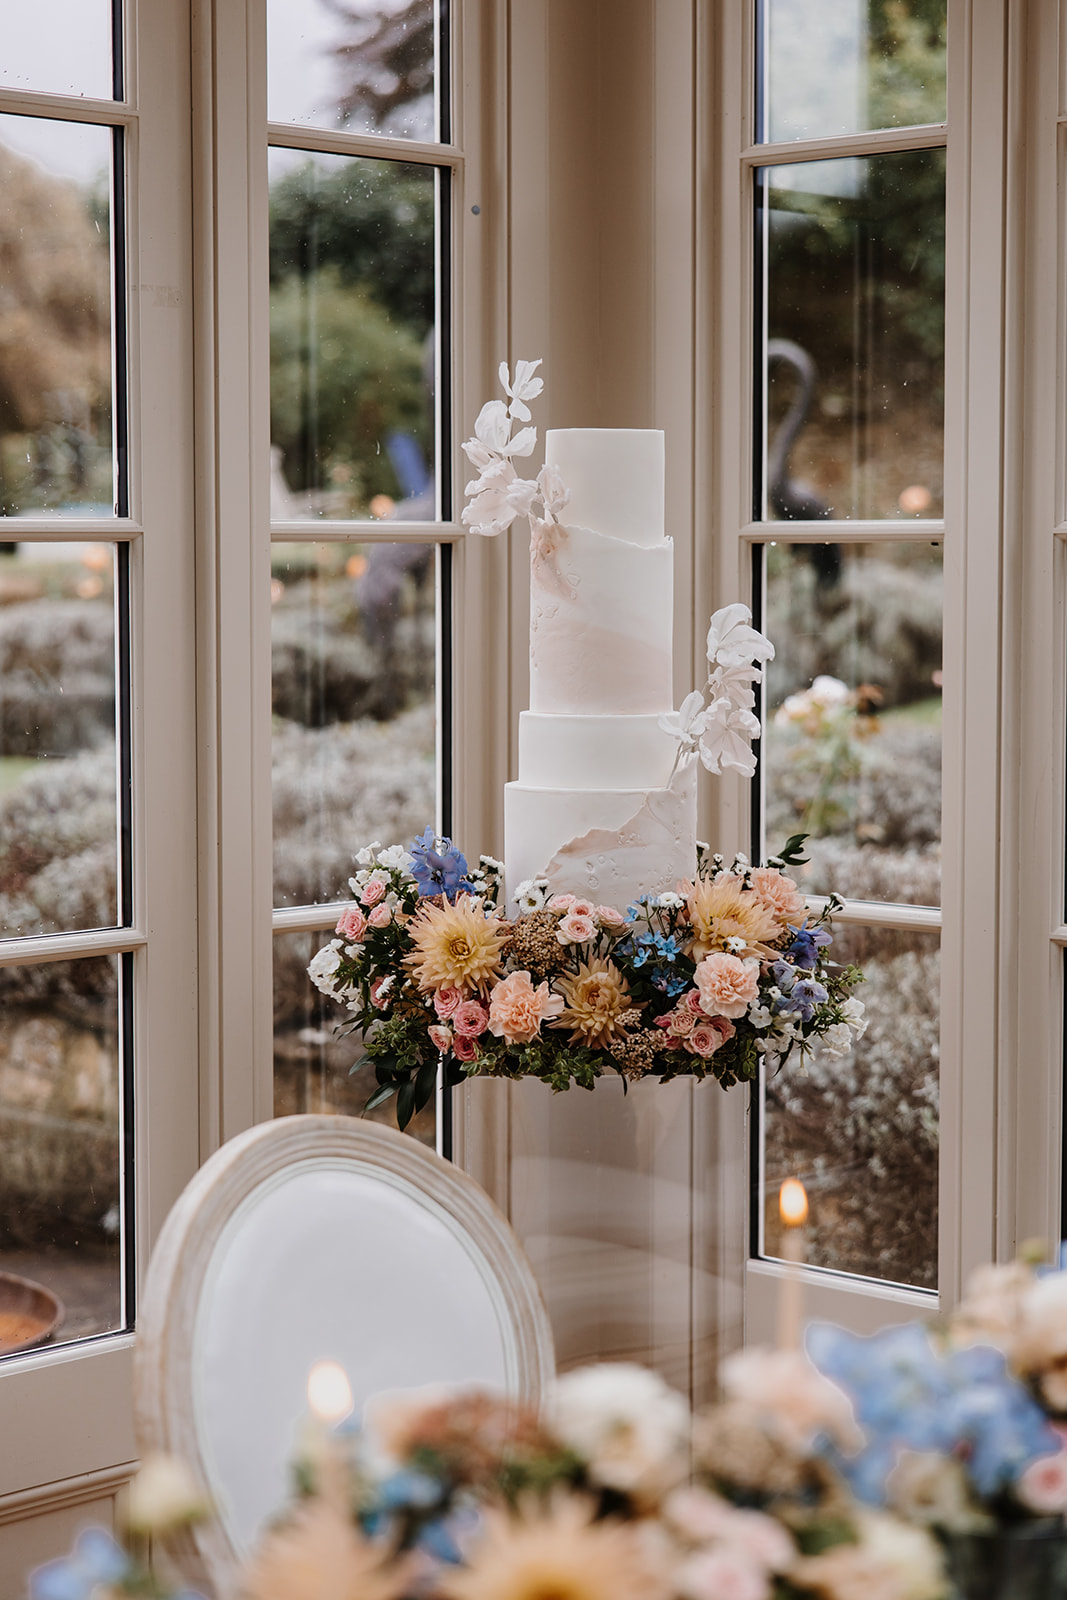 Contemporary luxury wedding cake | London and Home Counties Wedding cakes | Louise Hayes Cake Design